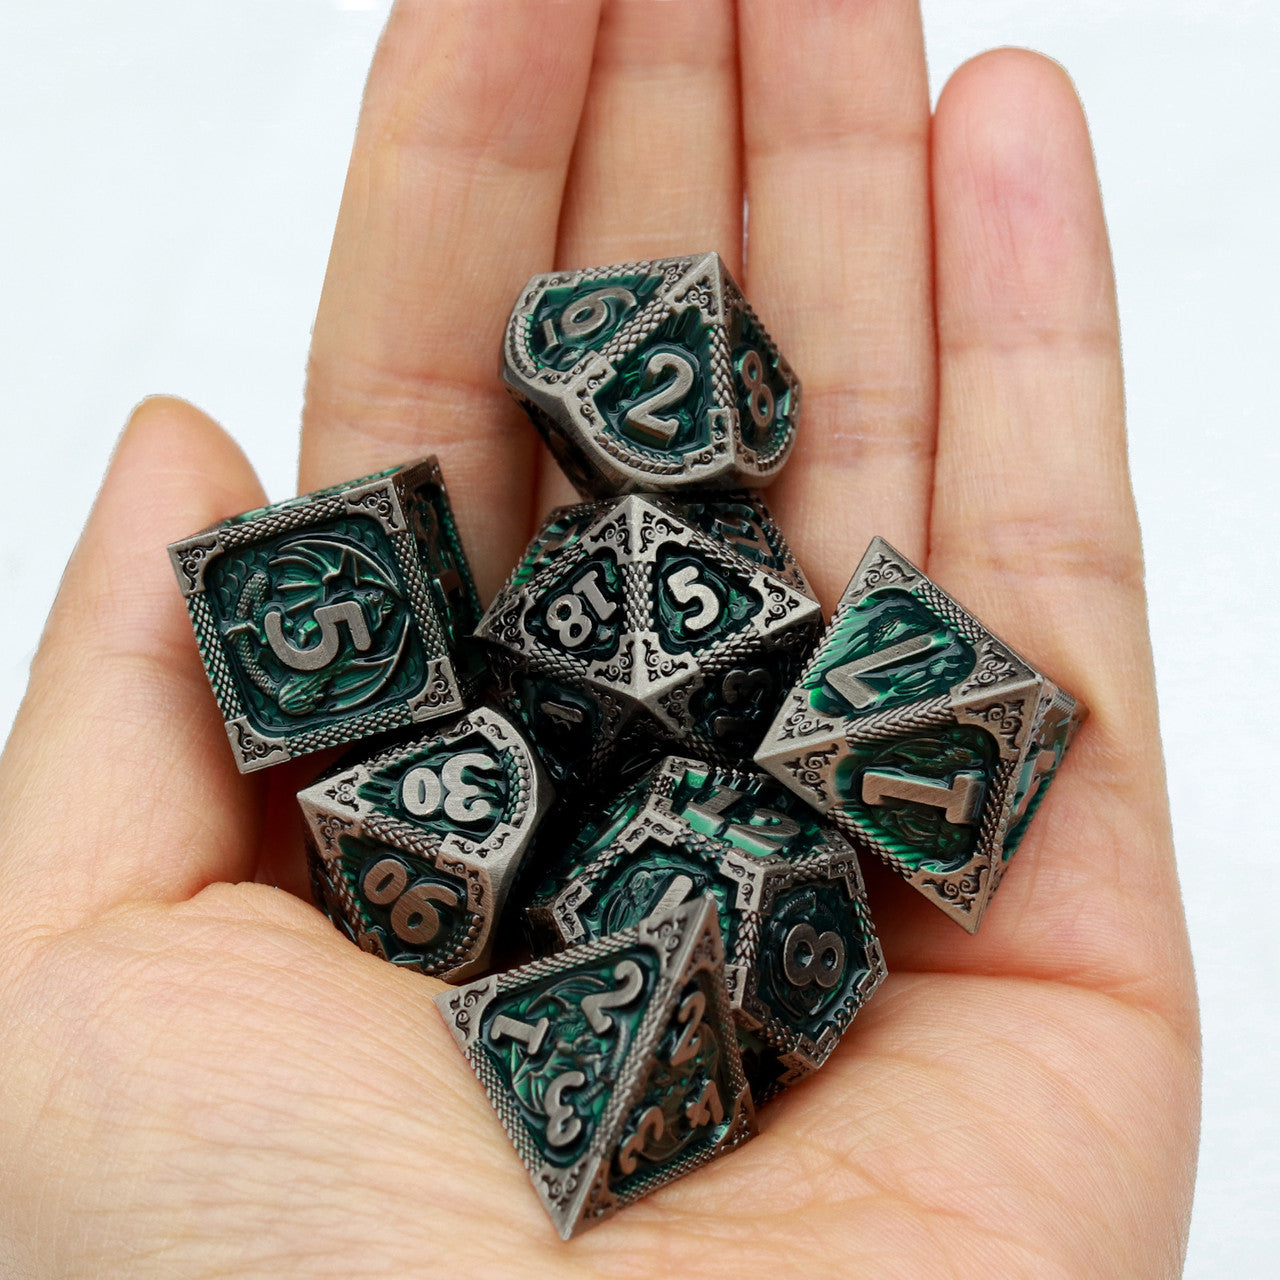 green metal dnd dice set with dragon pattern and dragon skin leather dice bag